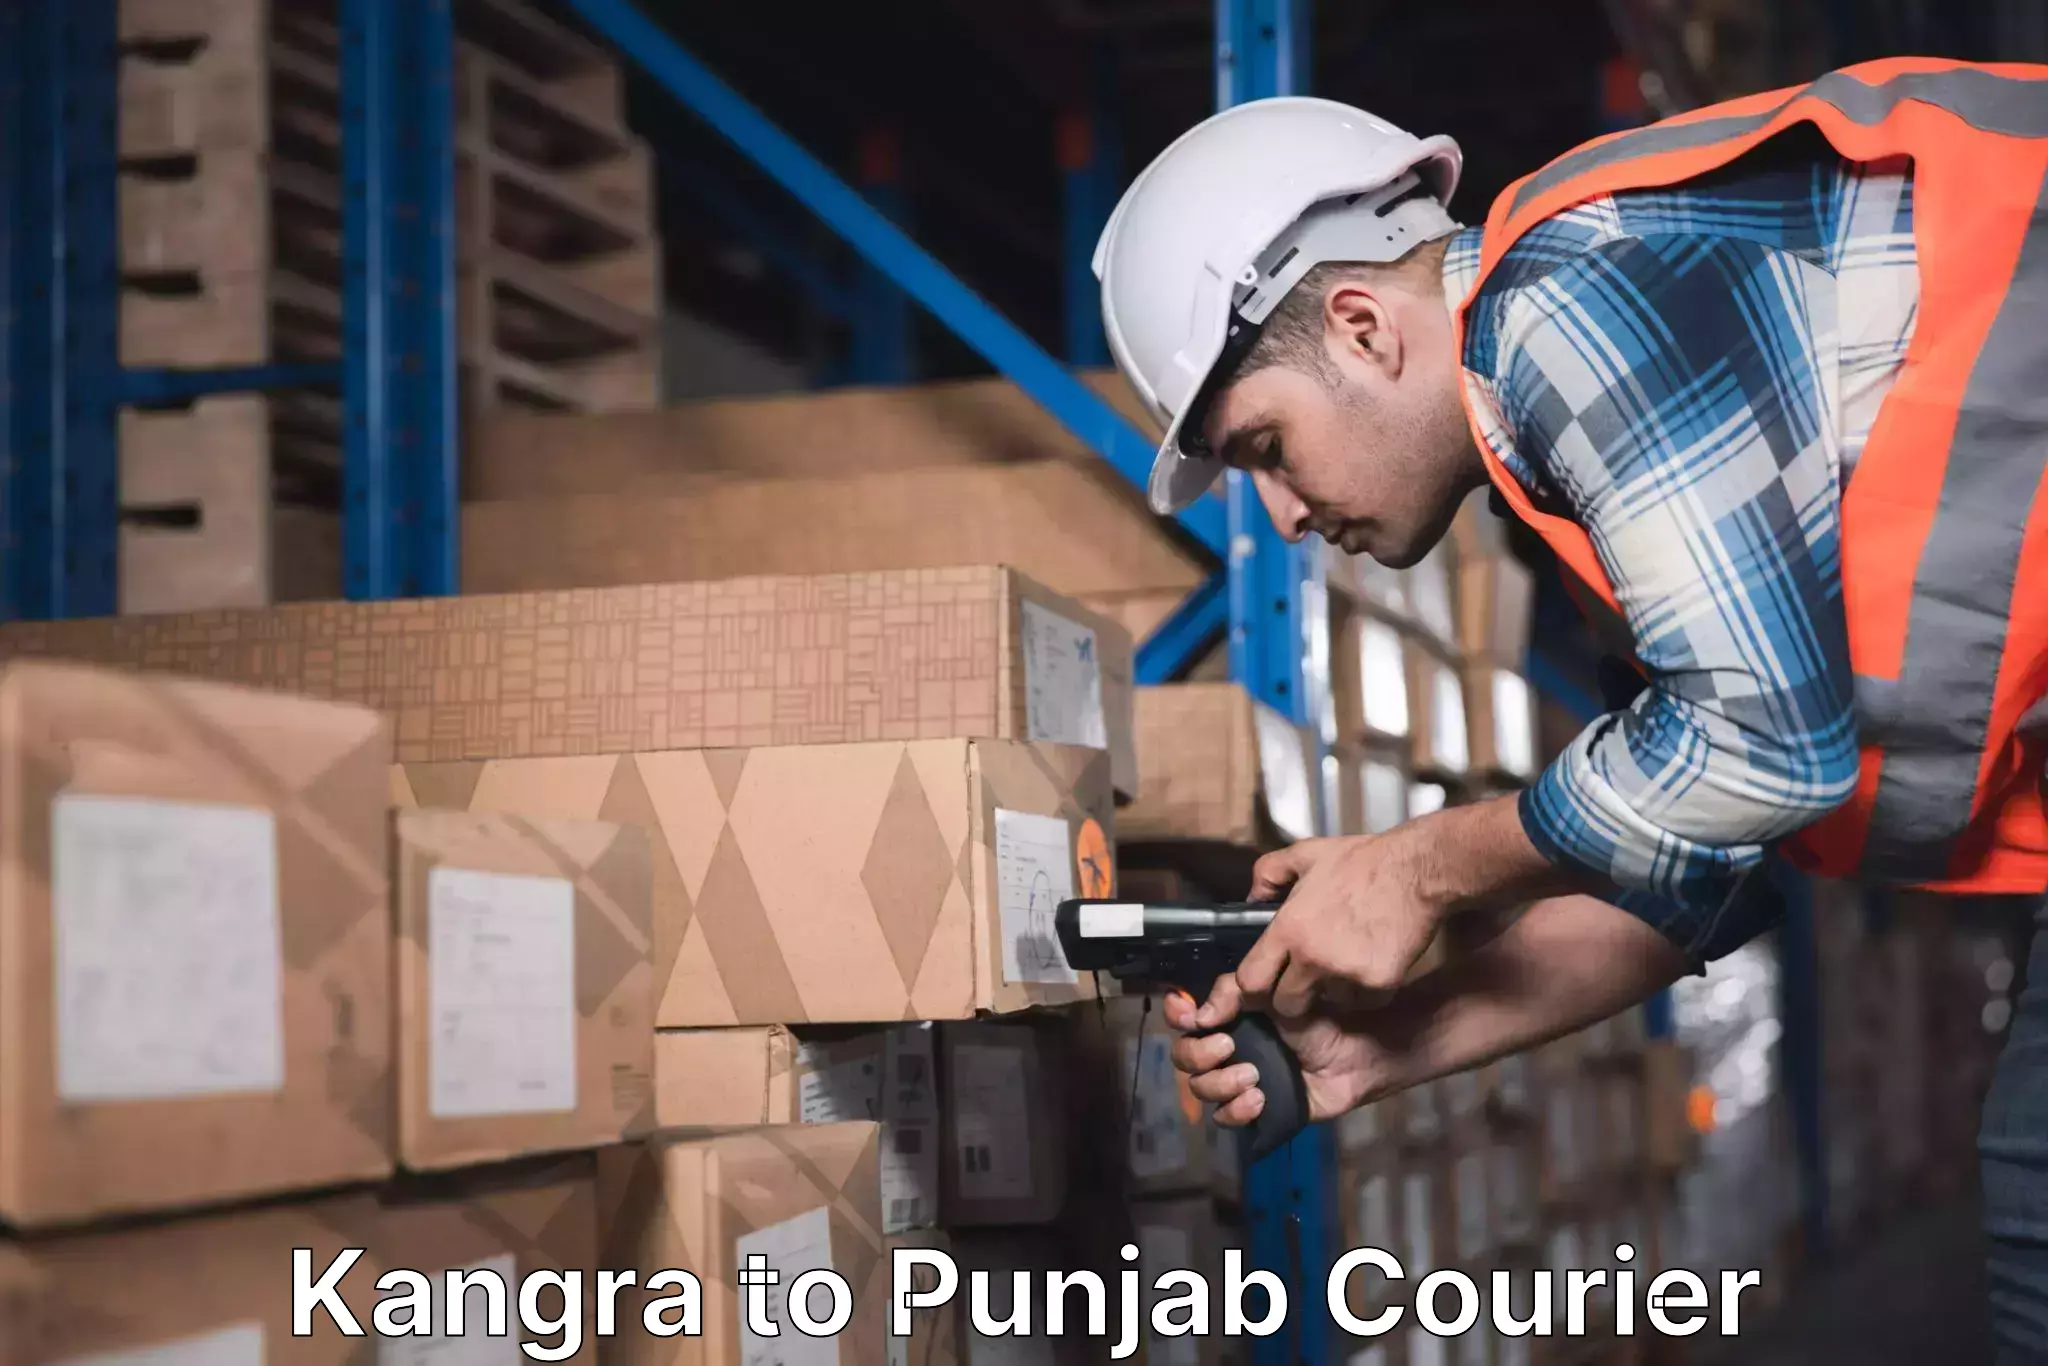 24/7 courier service in Kangra to Ludhiana